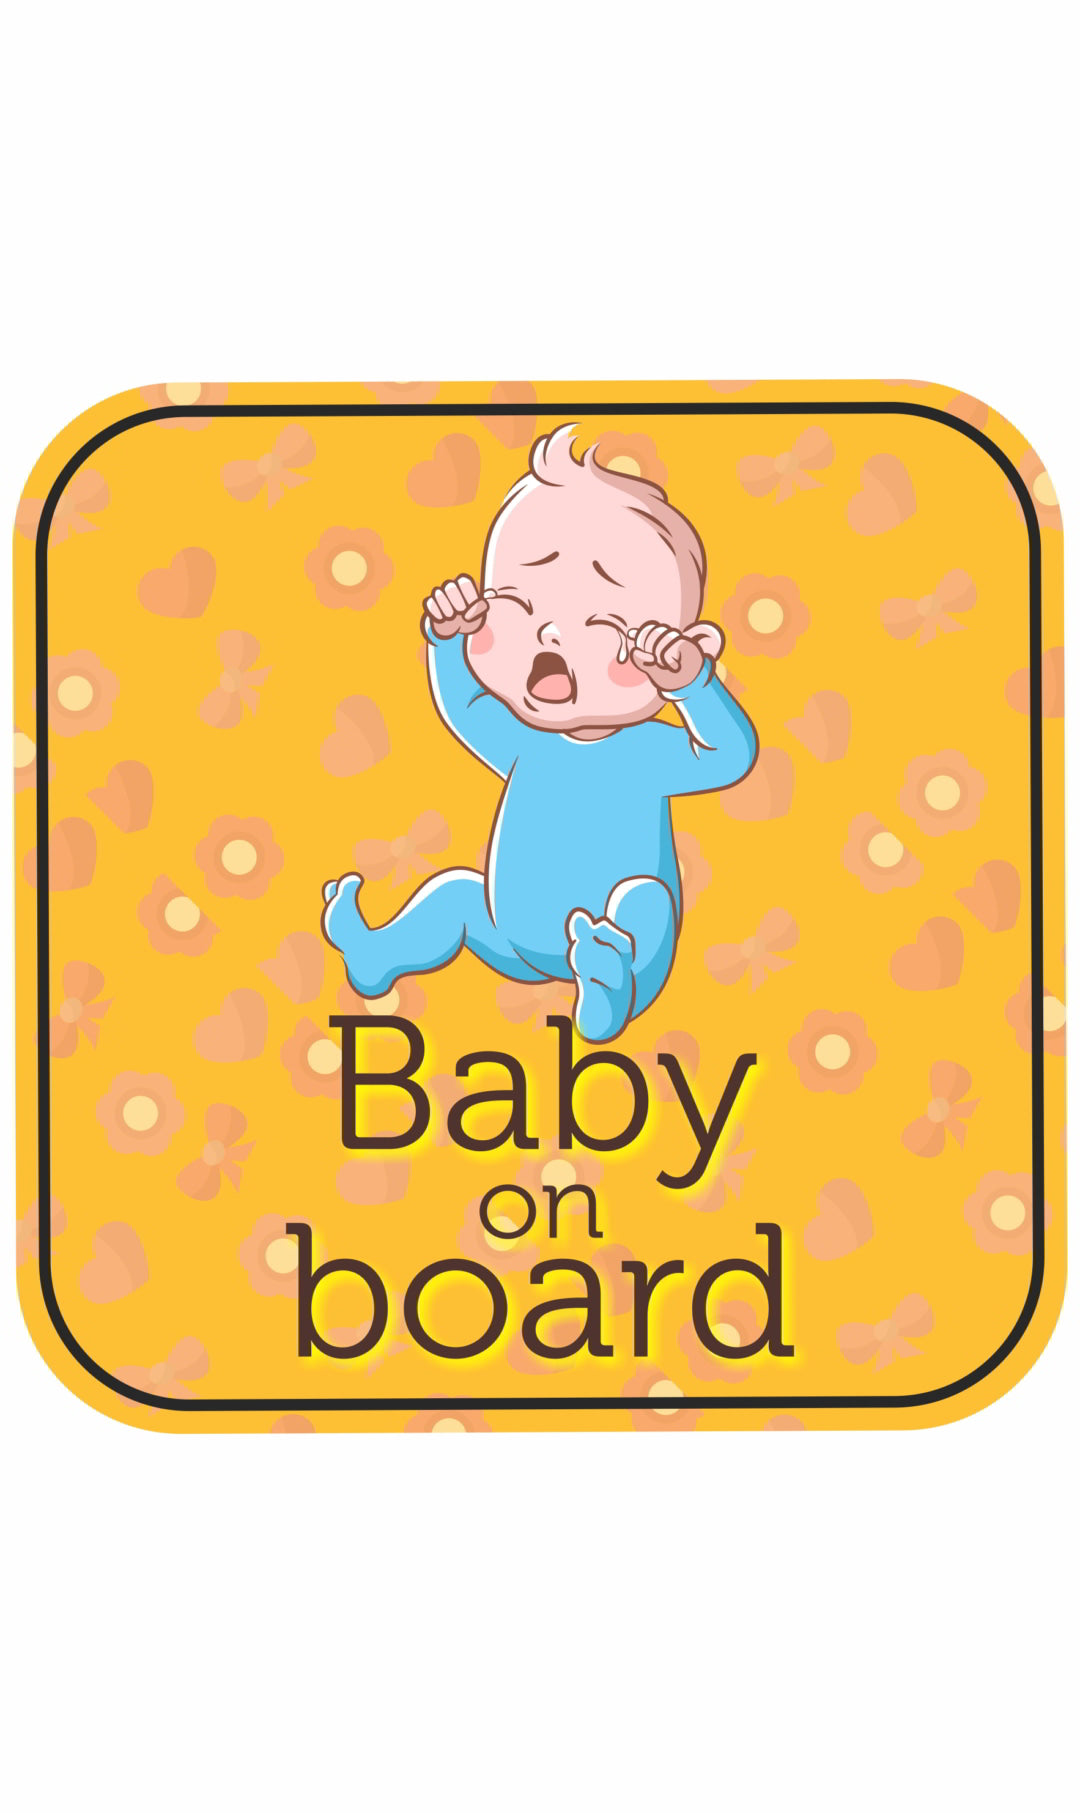 Baby on Board Decal Sticker(2pc)_c31